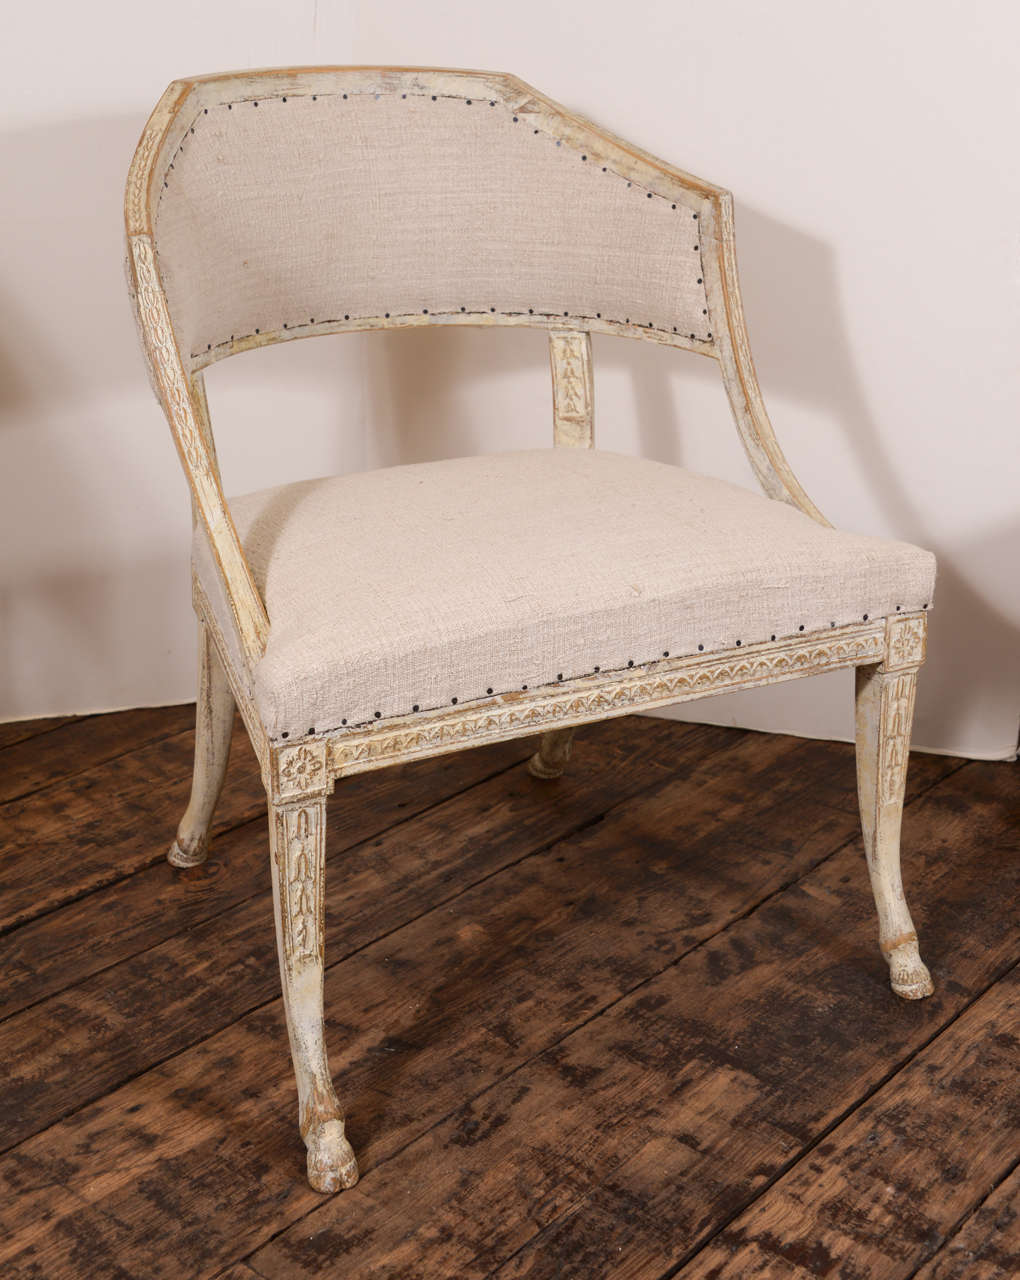 Gorgeous Swedish Barrel back chair with hoof feet, Gustavian period, upholstered in antique linen.  A fabulous chair.